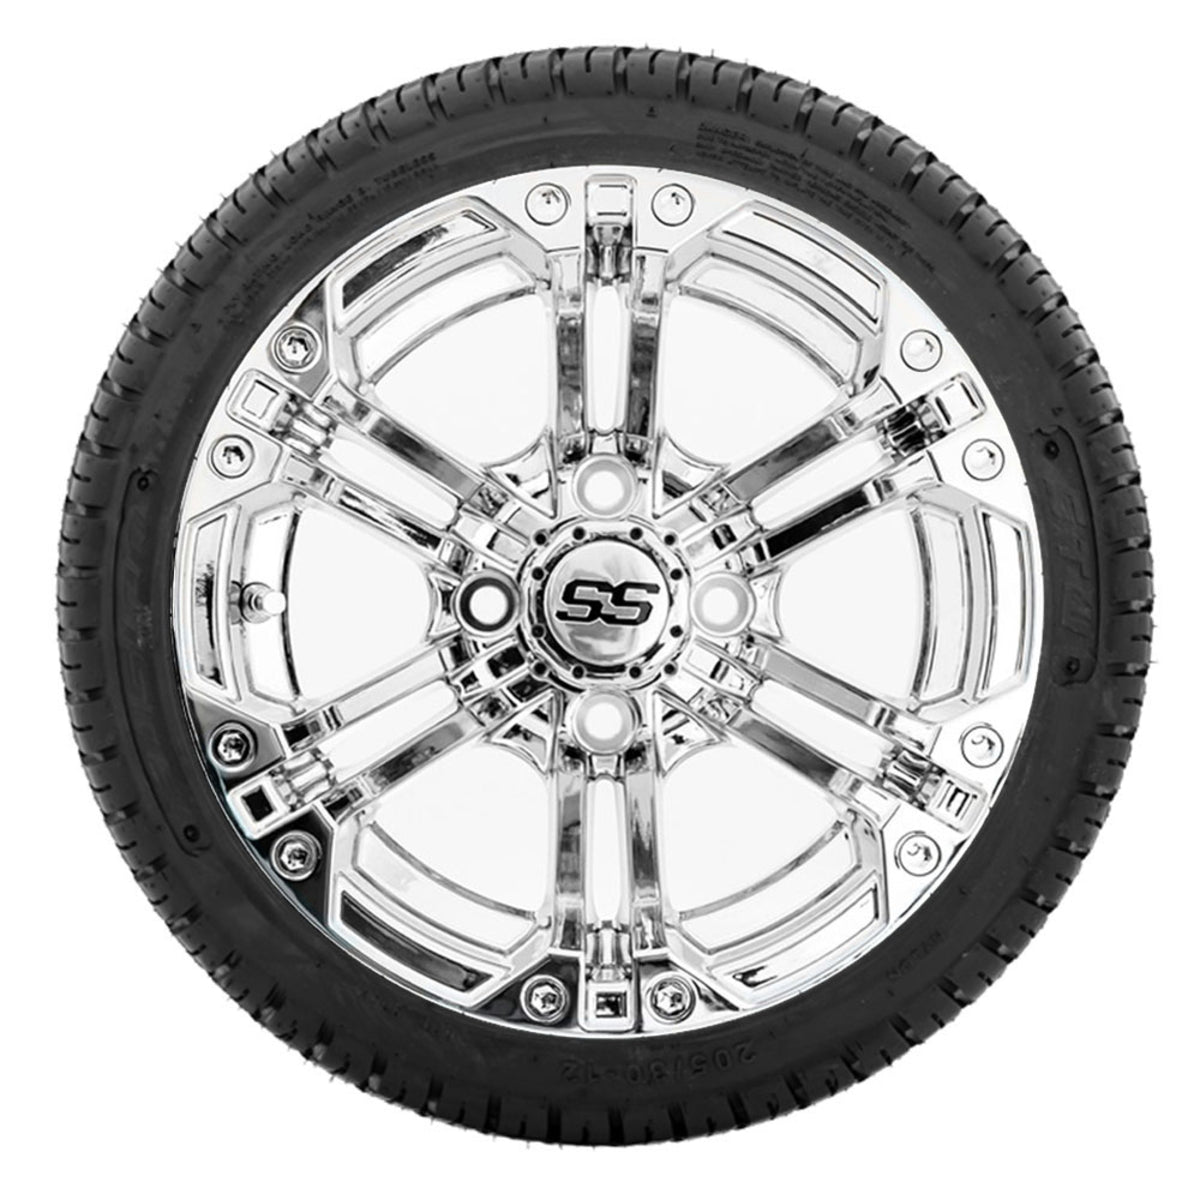 12" GTW Specter Chrome Wheels with 18" Fusion DOT Street Tires "‚Äú Set of 4